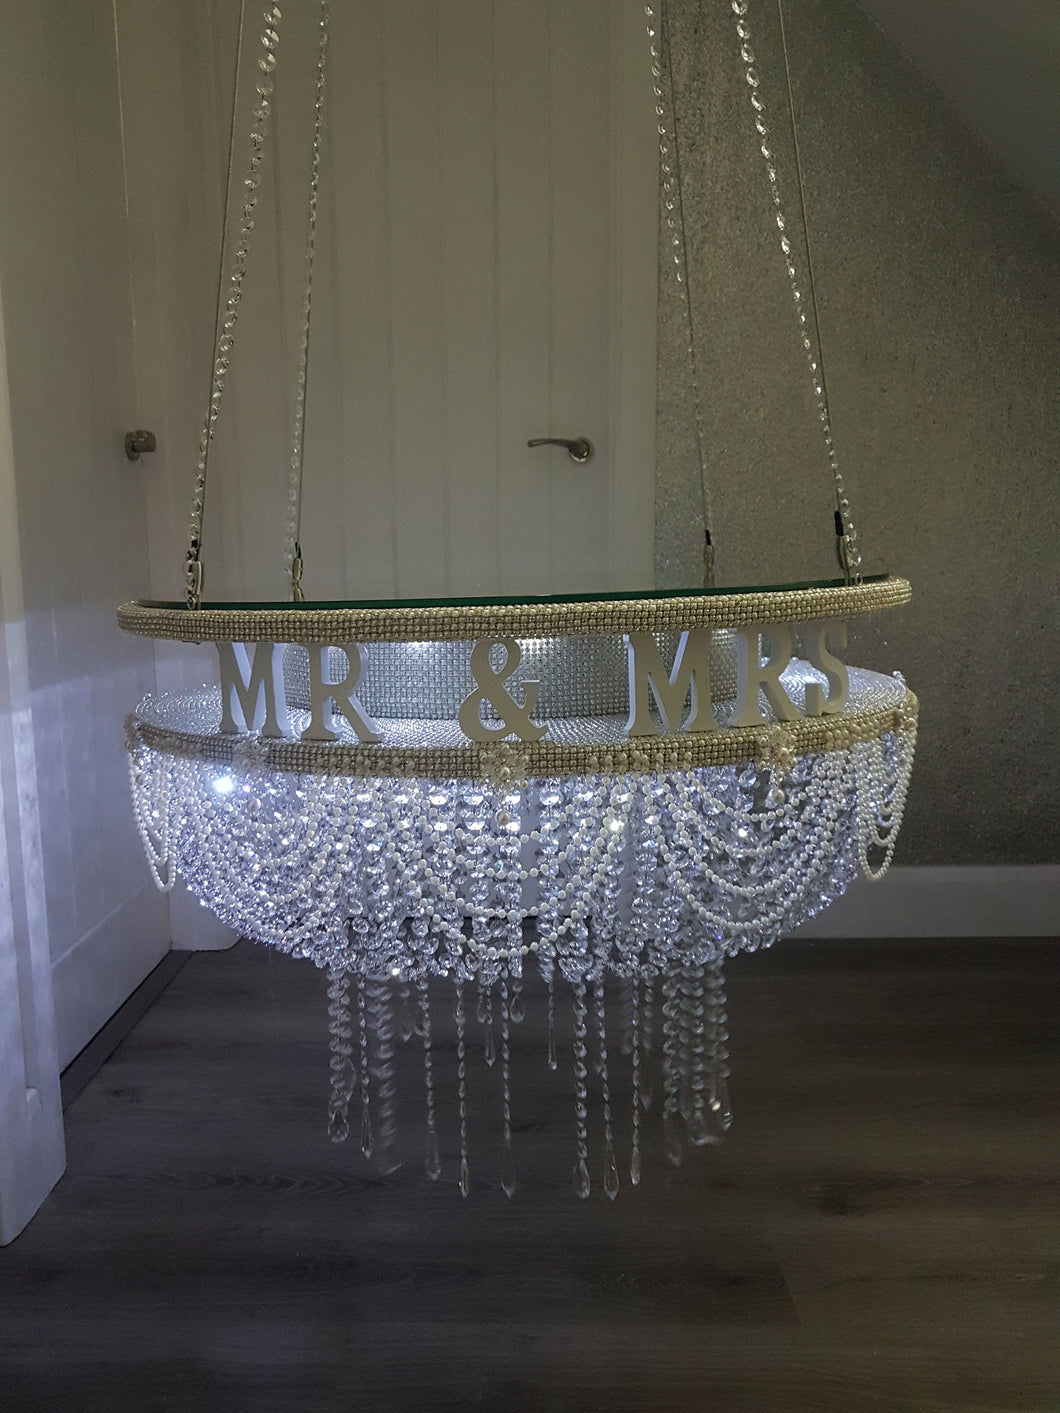 Suspended Swing cake ,Personalised, Mr & Mrs, Pearl and crystal drape stand mirror top + LED heavy duty holds 200lbs by Crystal wedding uk